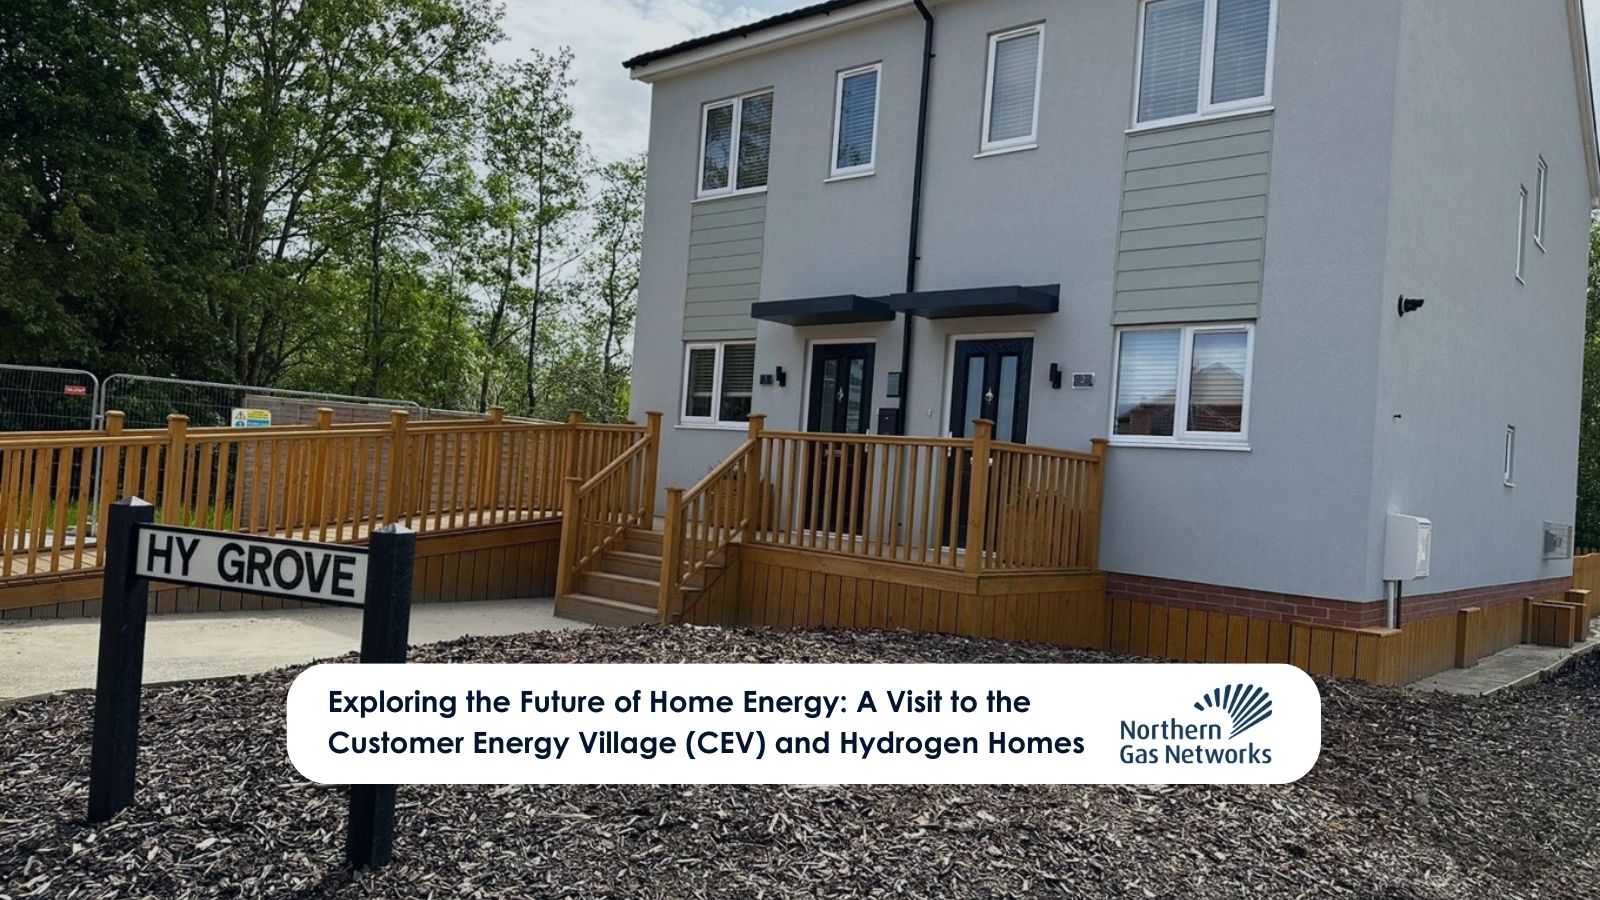 Exploring the Future of Home Energy: A Visit to the Customer Energy Village (CEV) and Hydrogen Homes